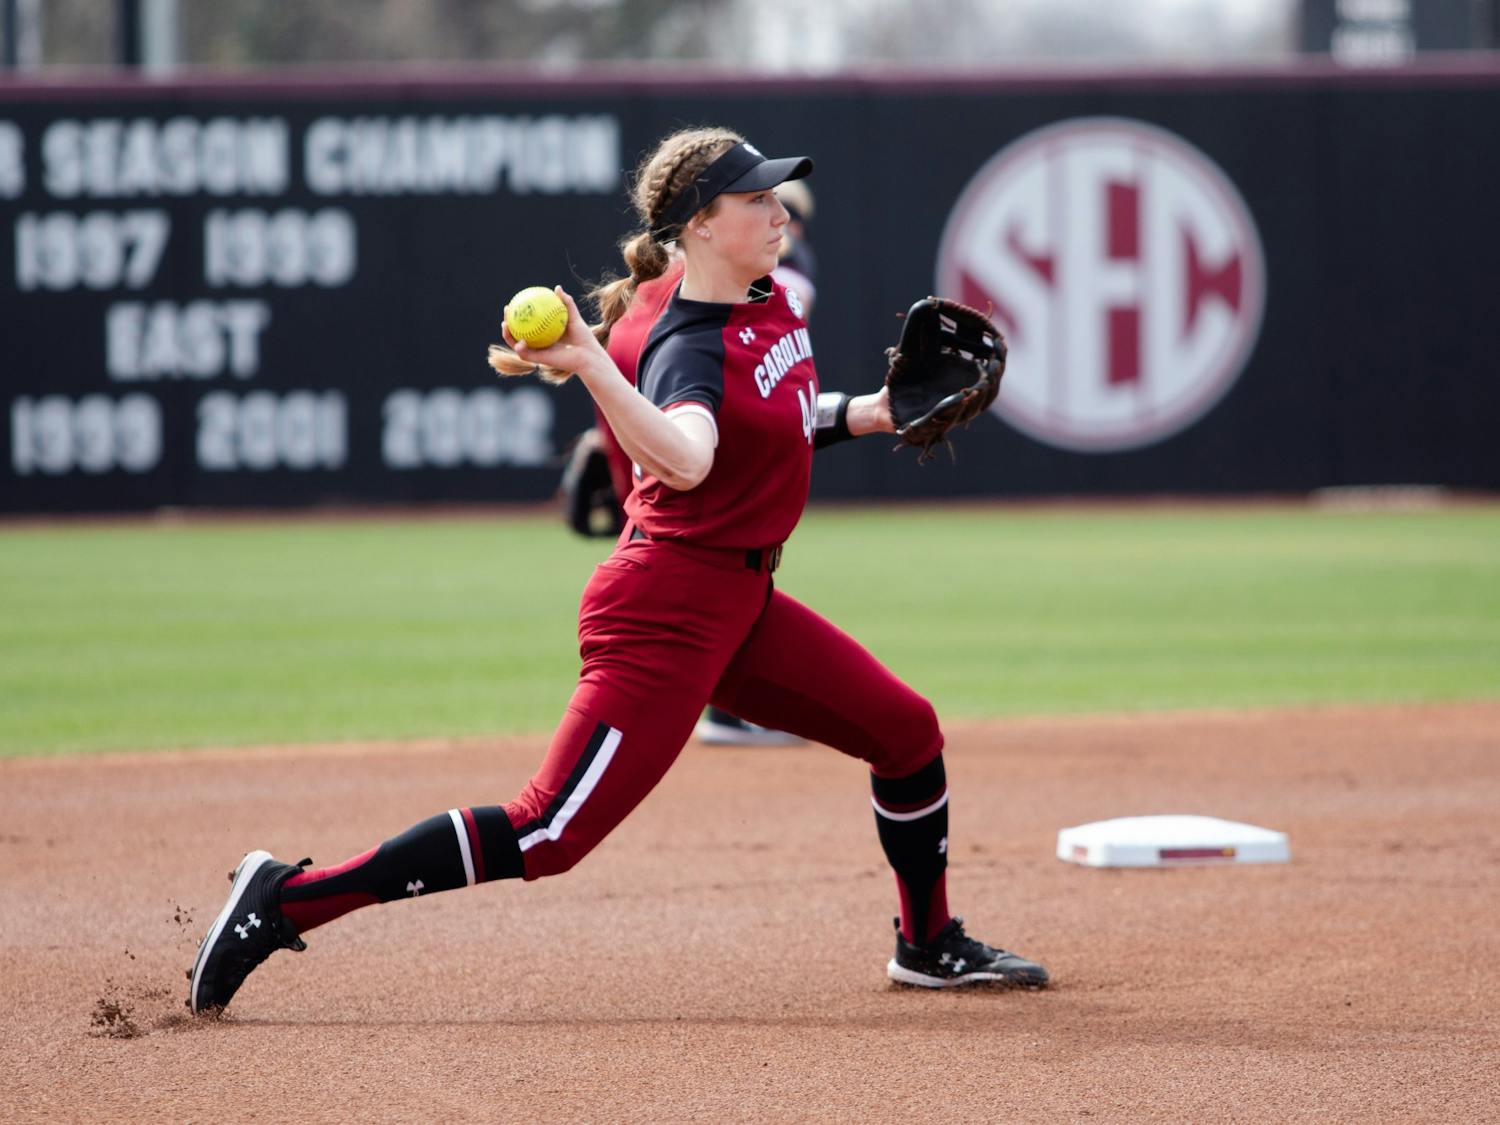 Freshman third baseman Emma Sellers winds up for a throw during a game against Lipscomb on Saturday, Feb. 12, 2022 in Columbia, SC.